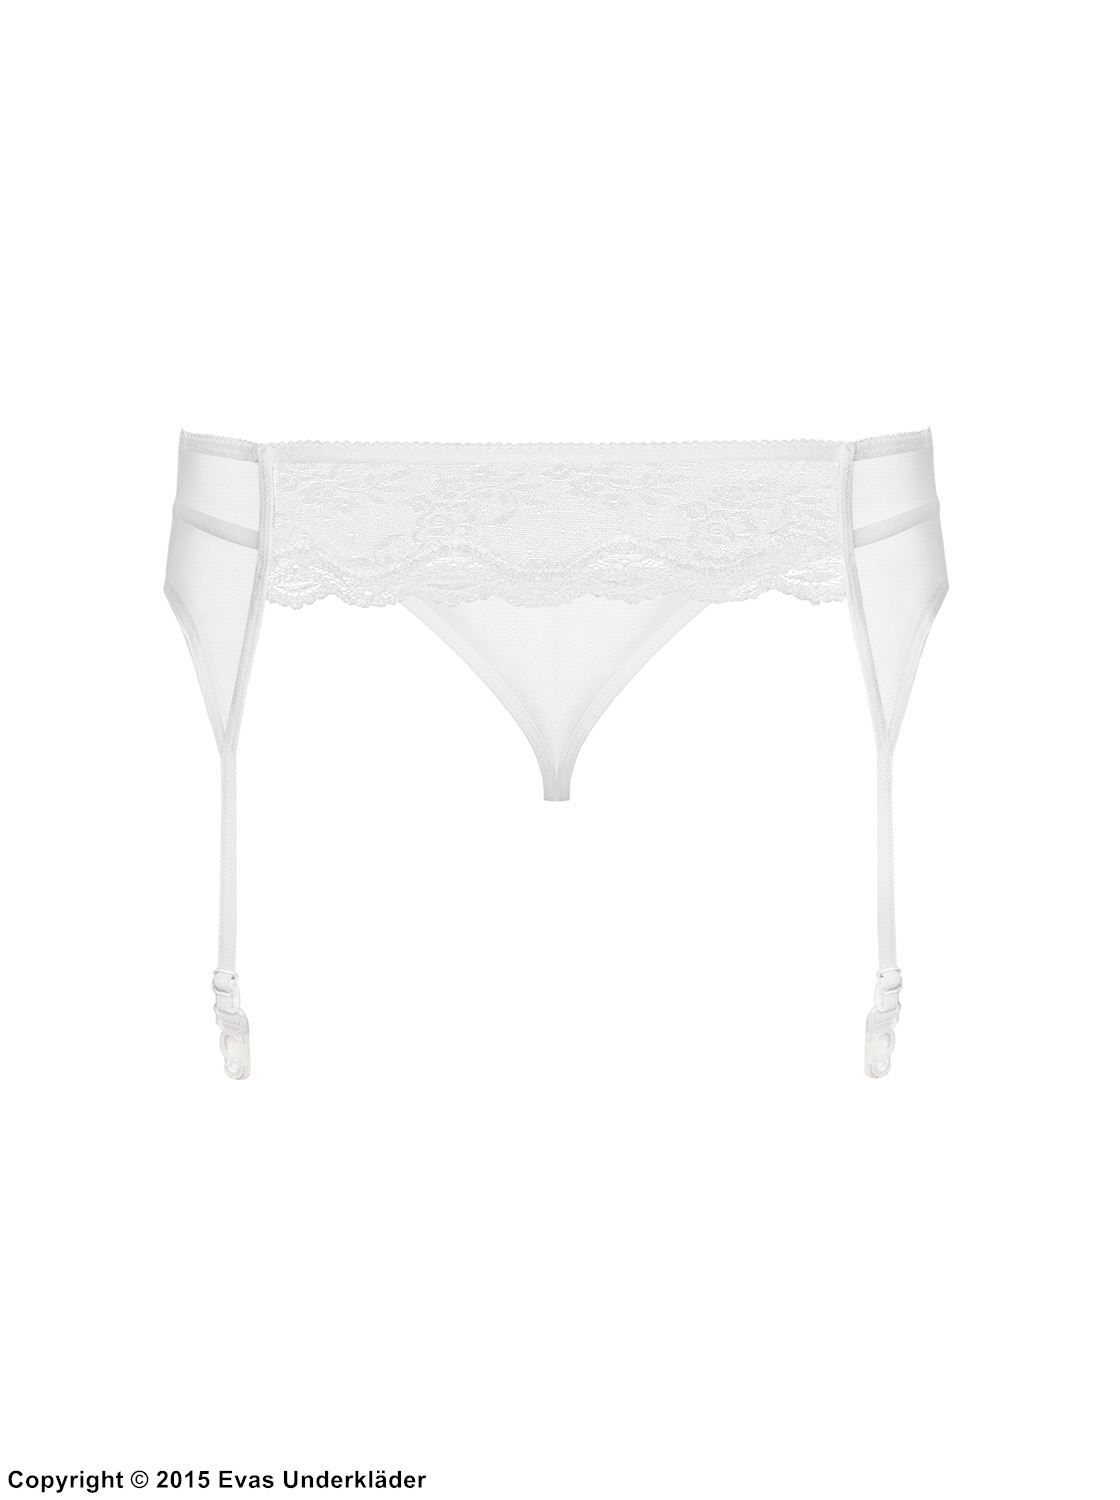 Garter belt and panty, floral lace, mesh inlay